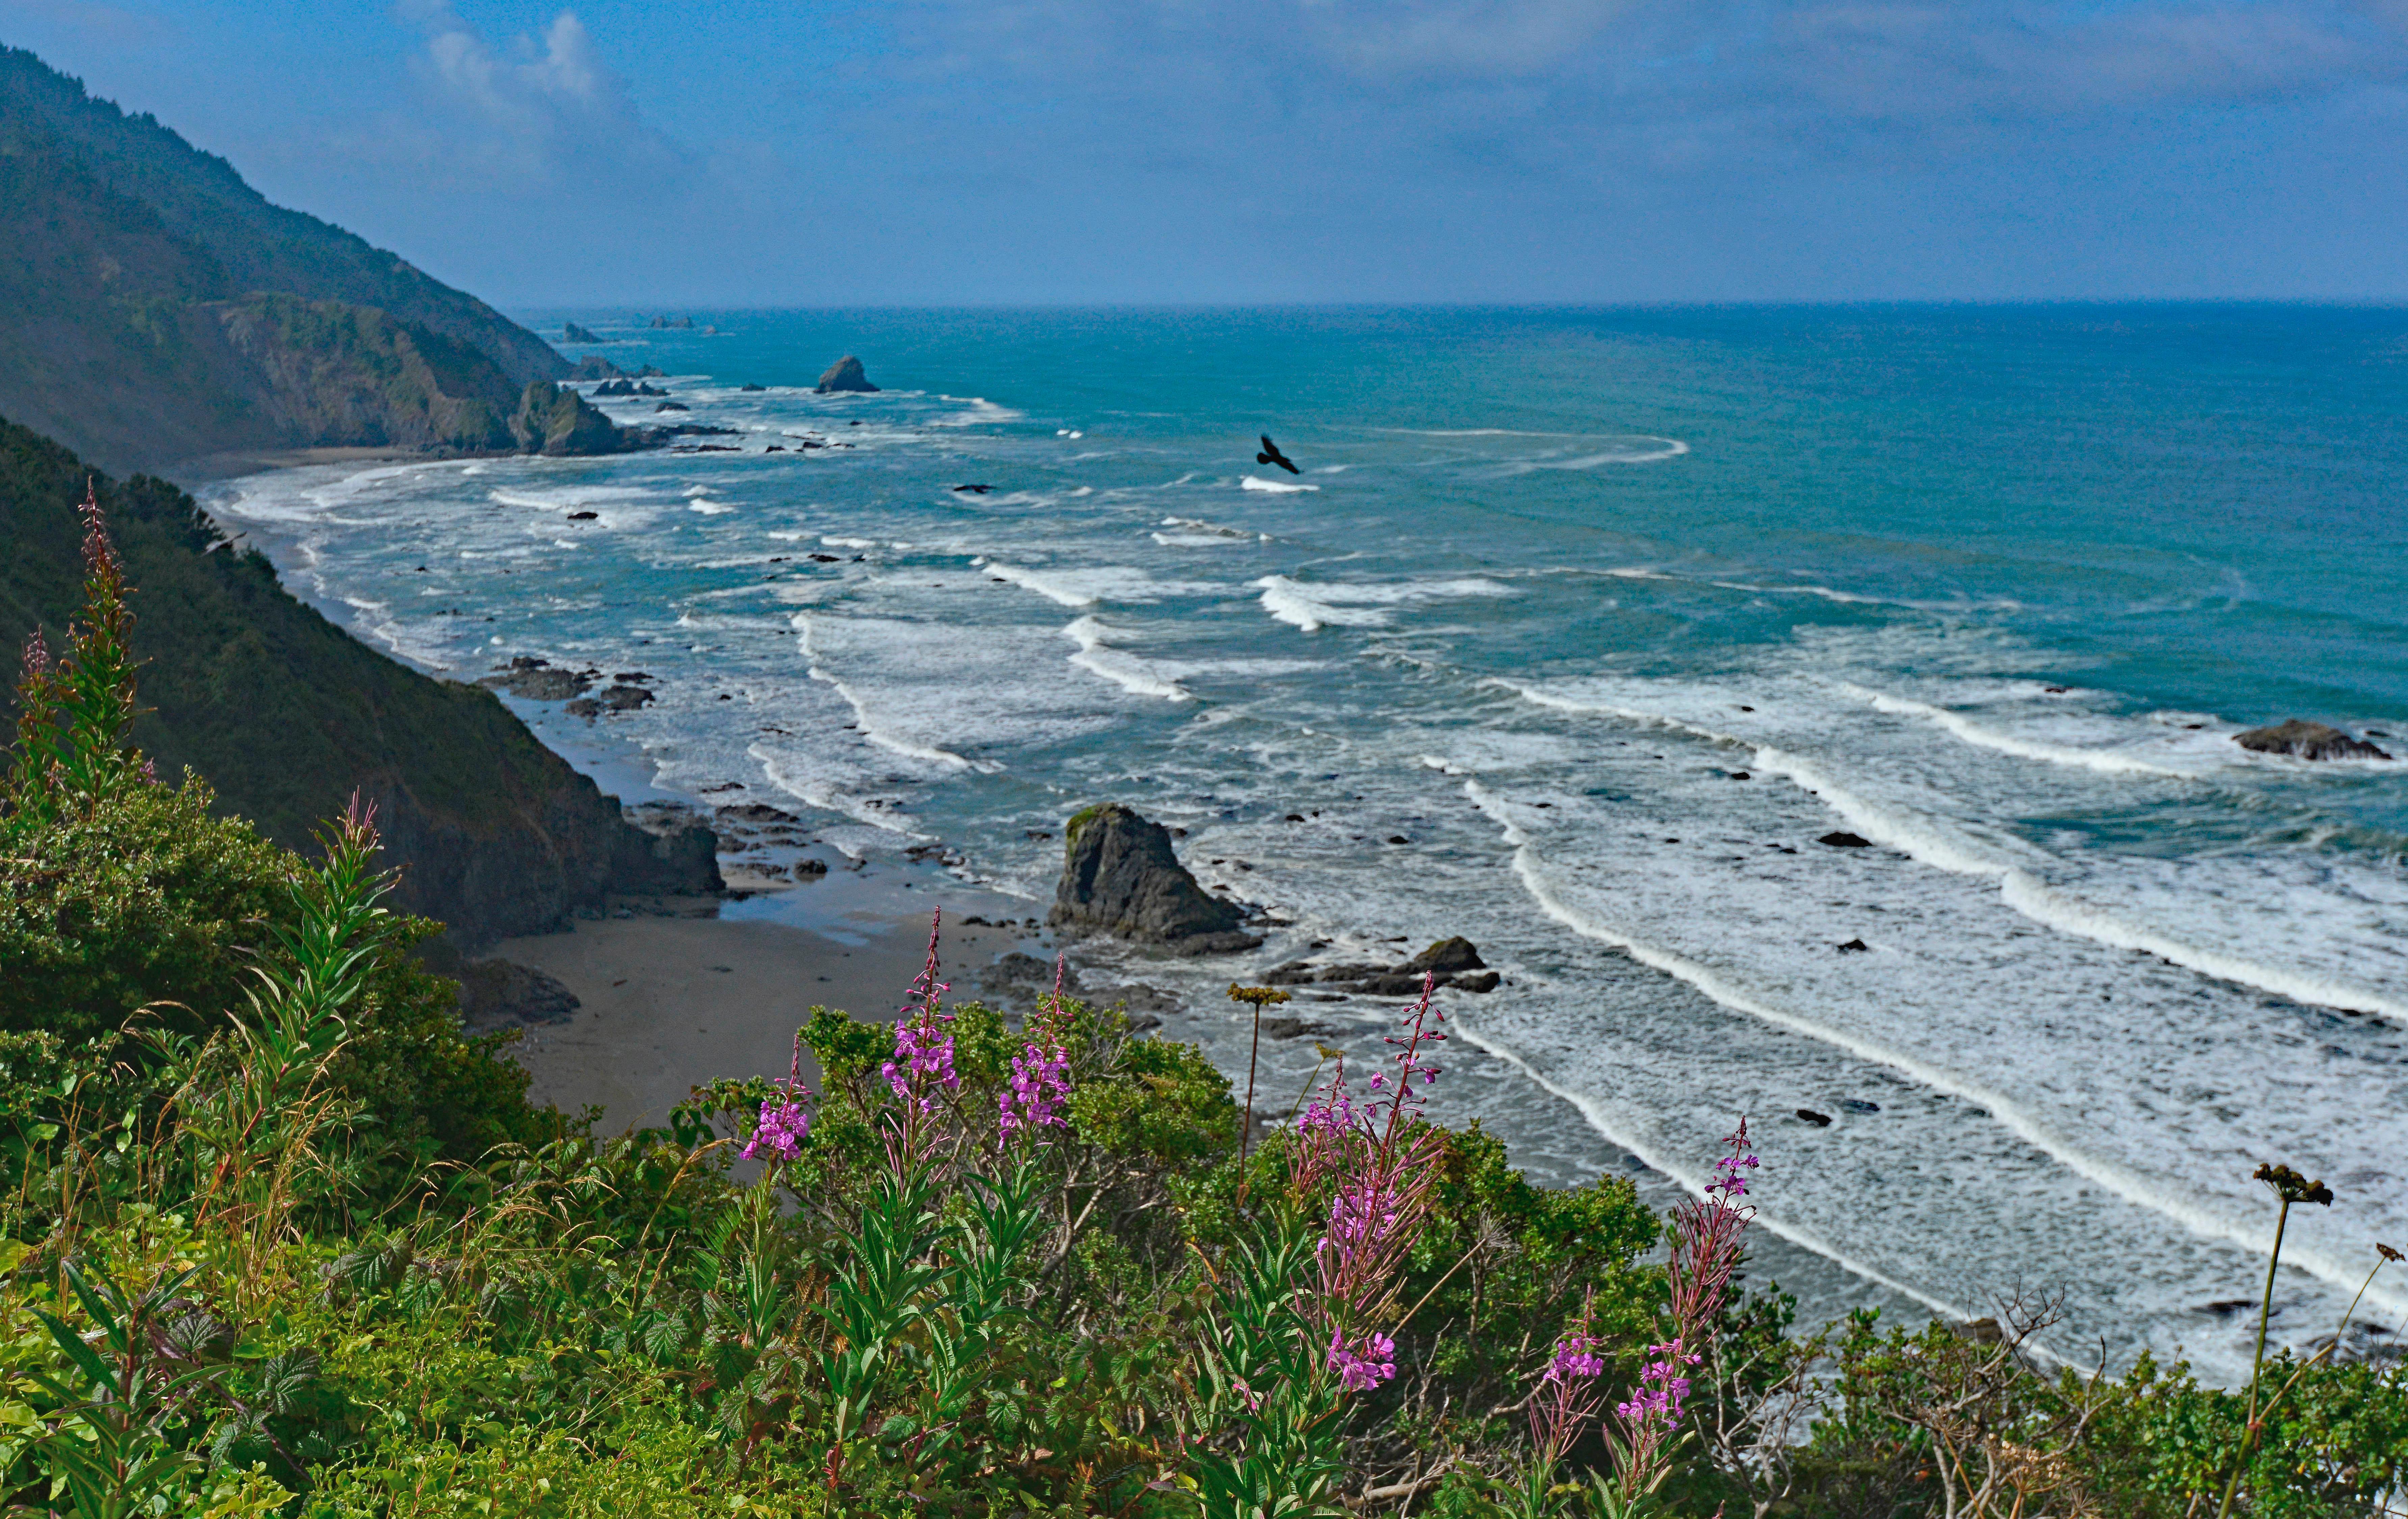 Rugged coastal cliffs drop to blue ocean and waves. Pink flowers in the foreground.